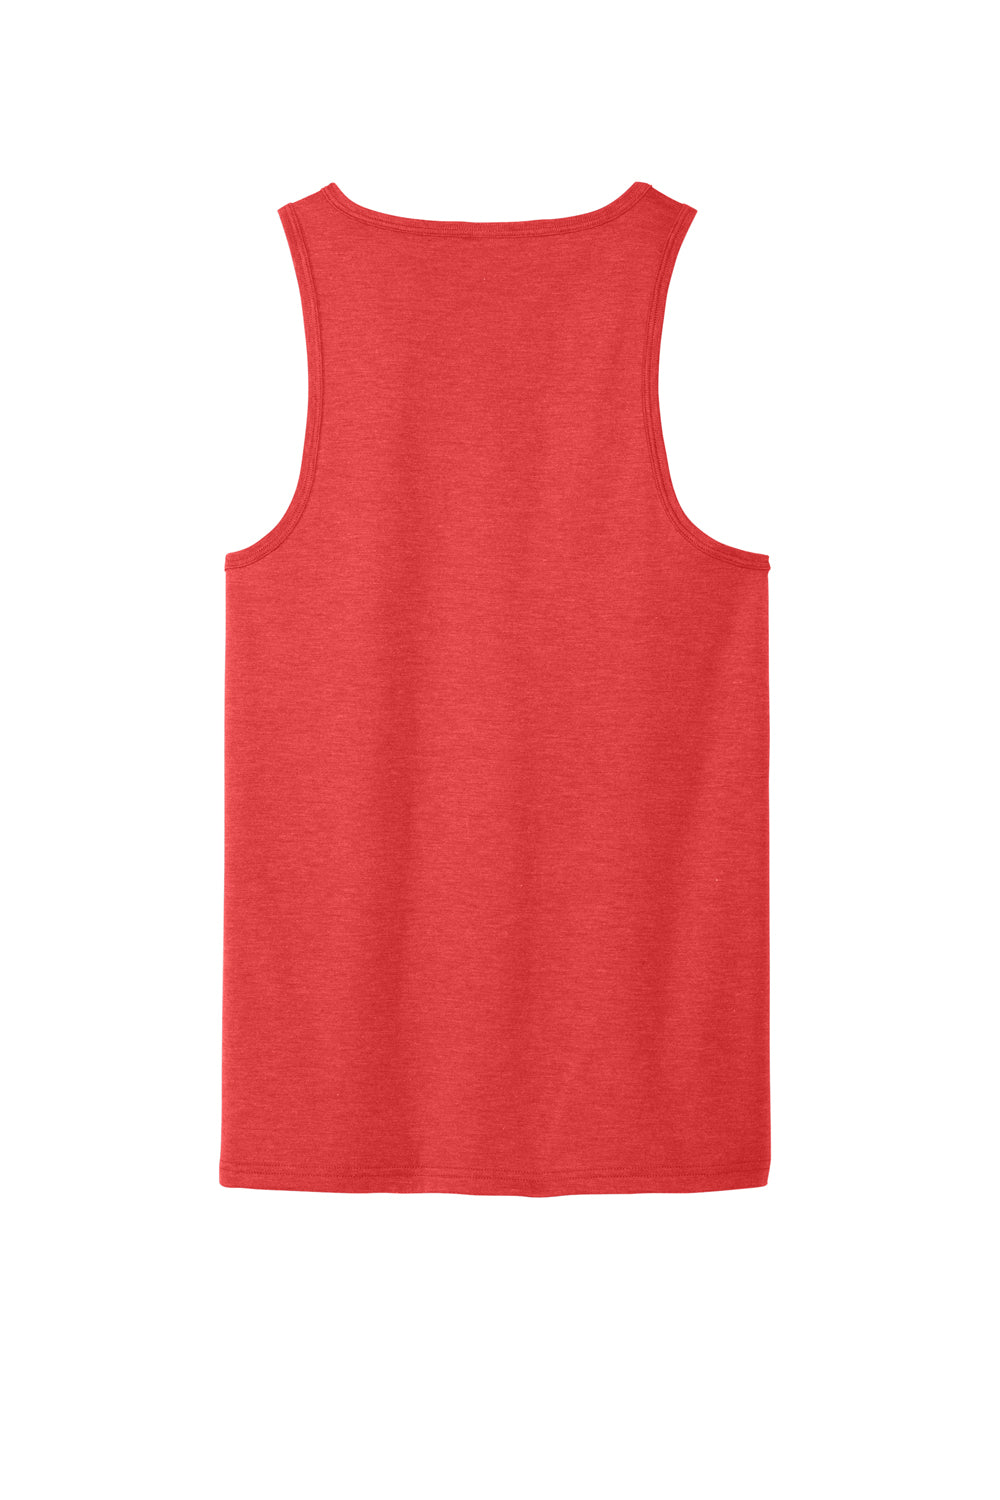 Allmade AL2019 Mens Tank Top Rise Up Red Flat Back